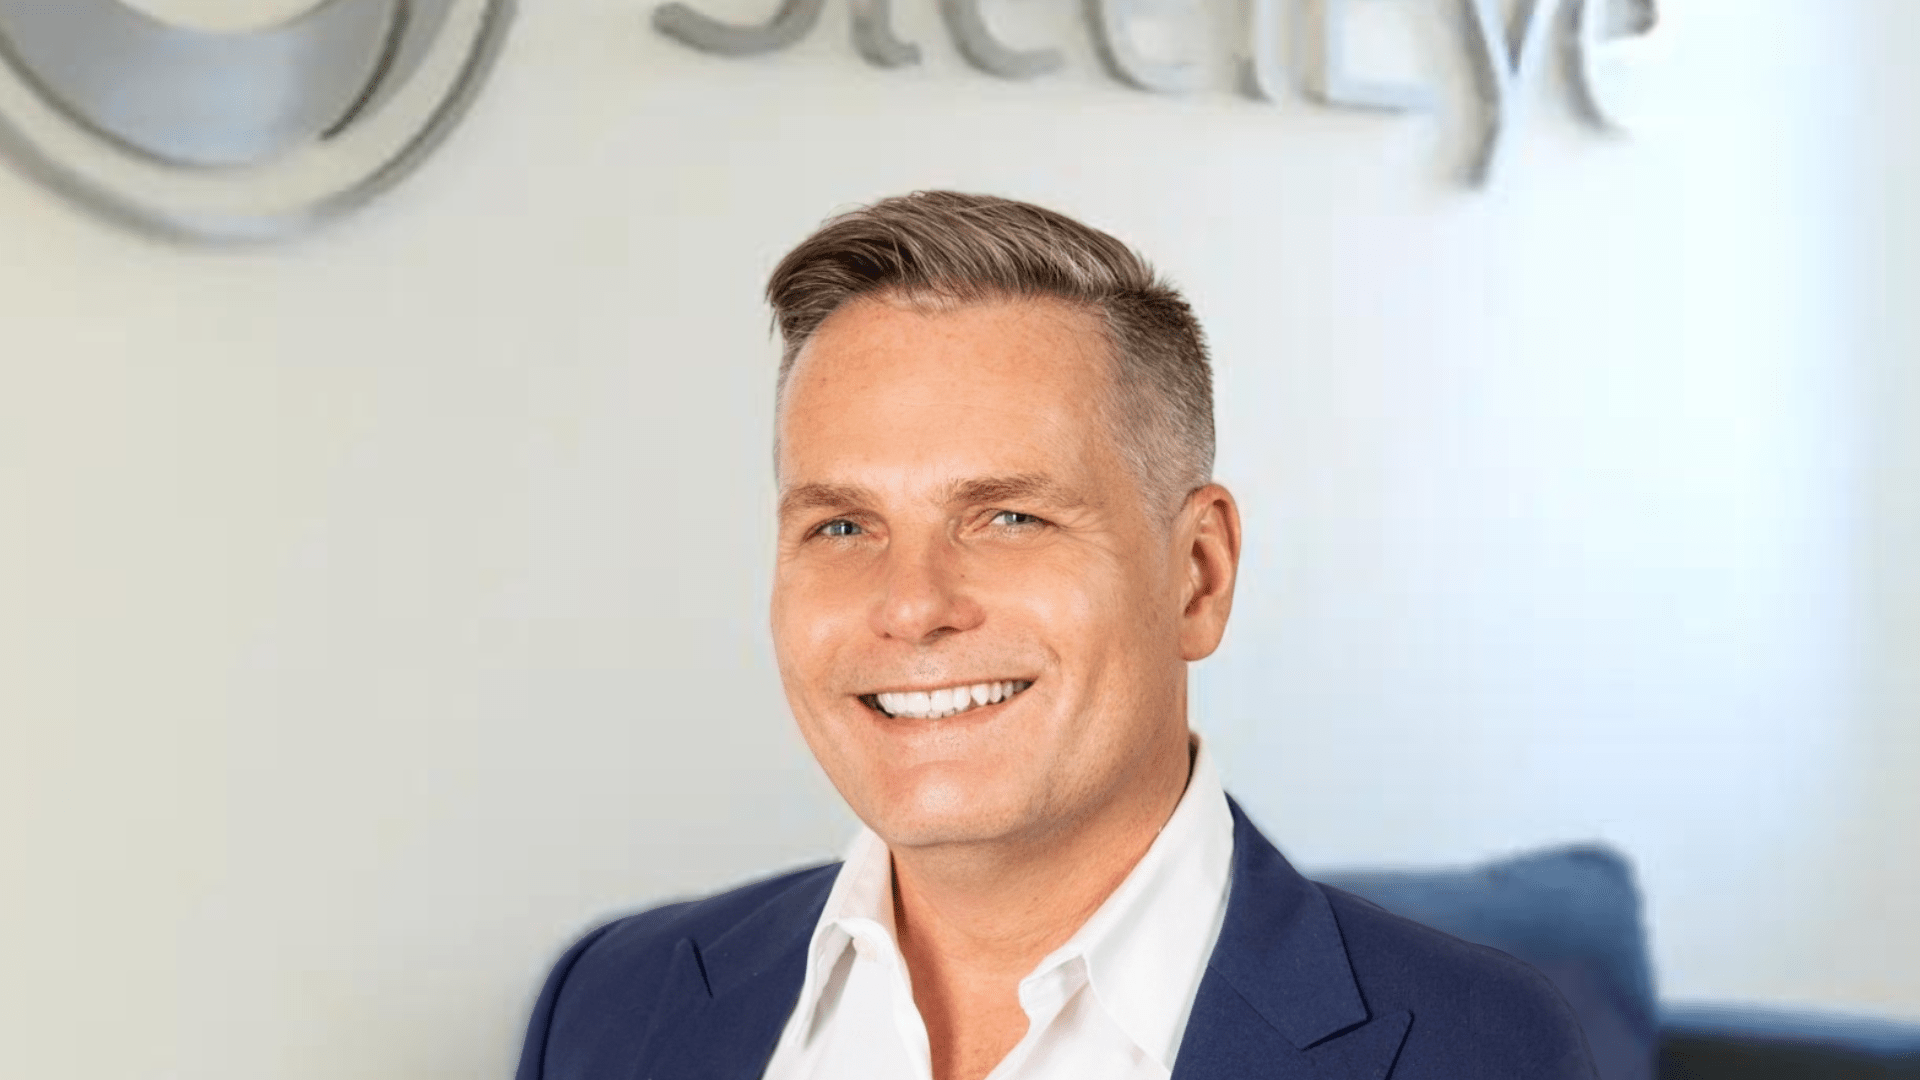 SteelEye Appoints Former Microsoft and Google Executive Christopher Pennington as Chief Revenue Officer to boost global sales